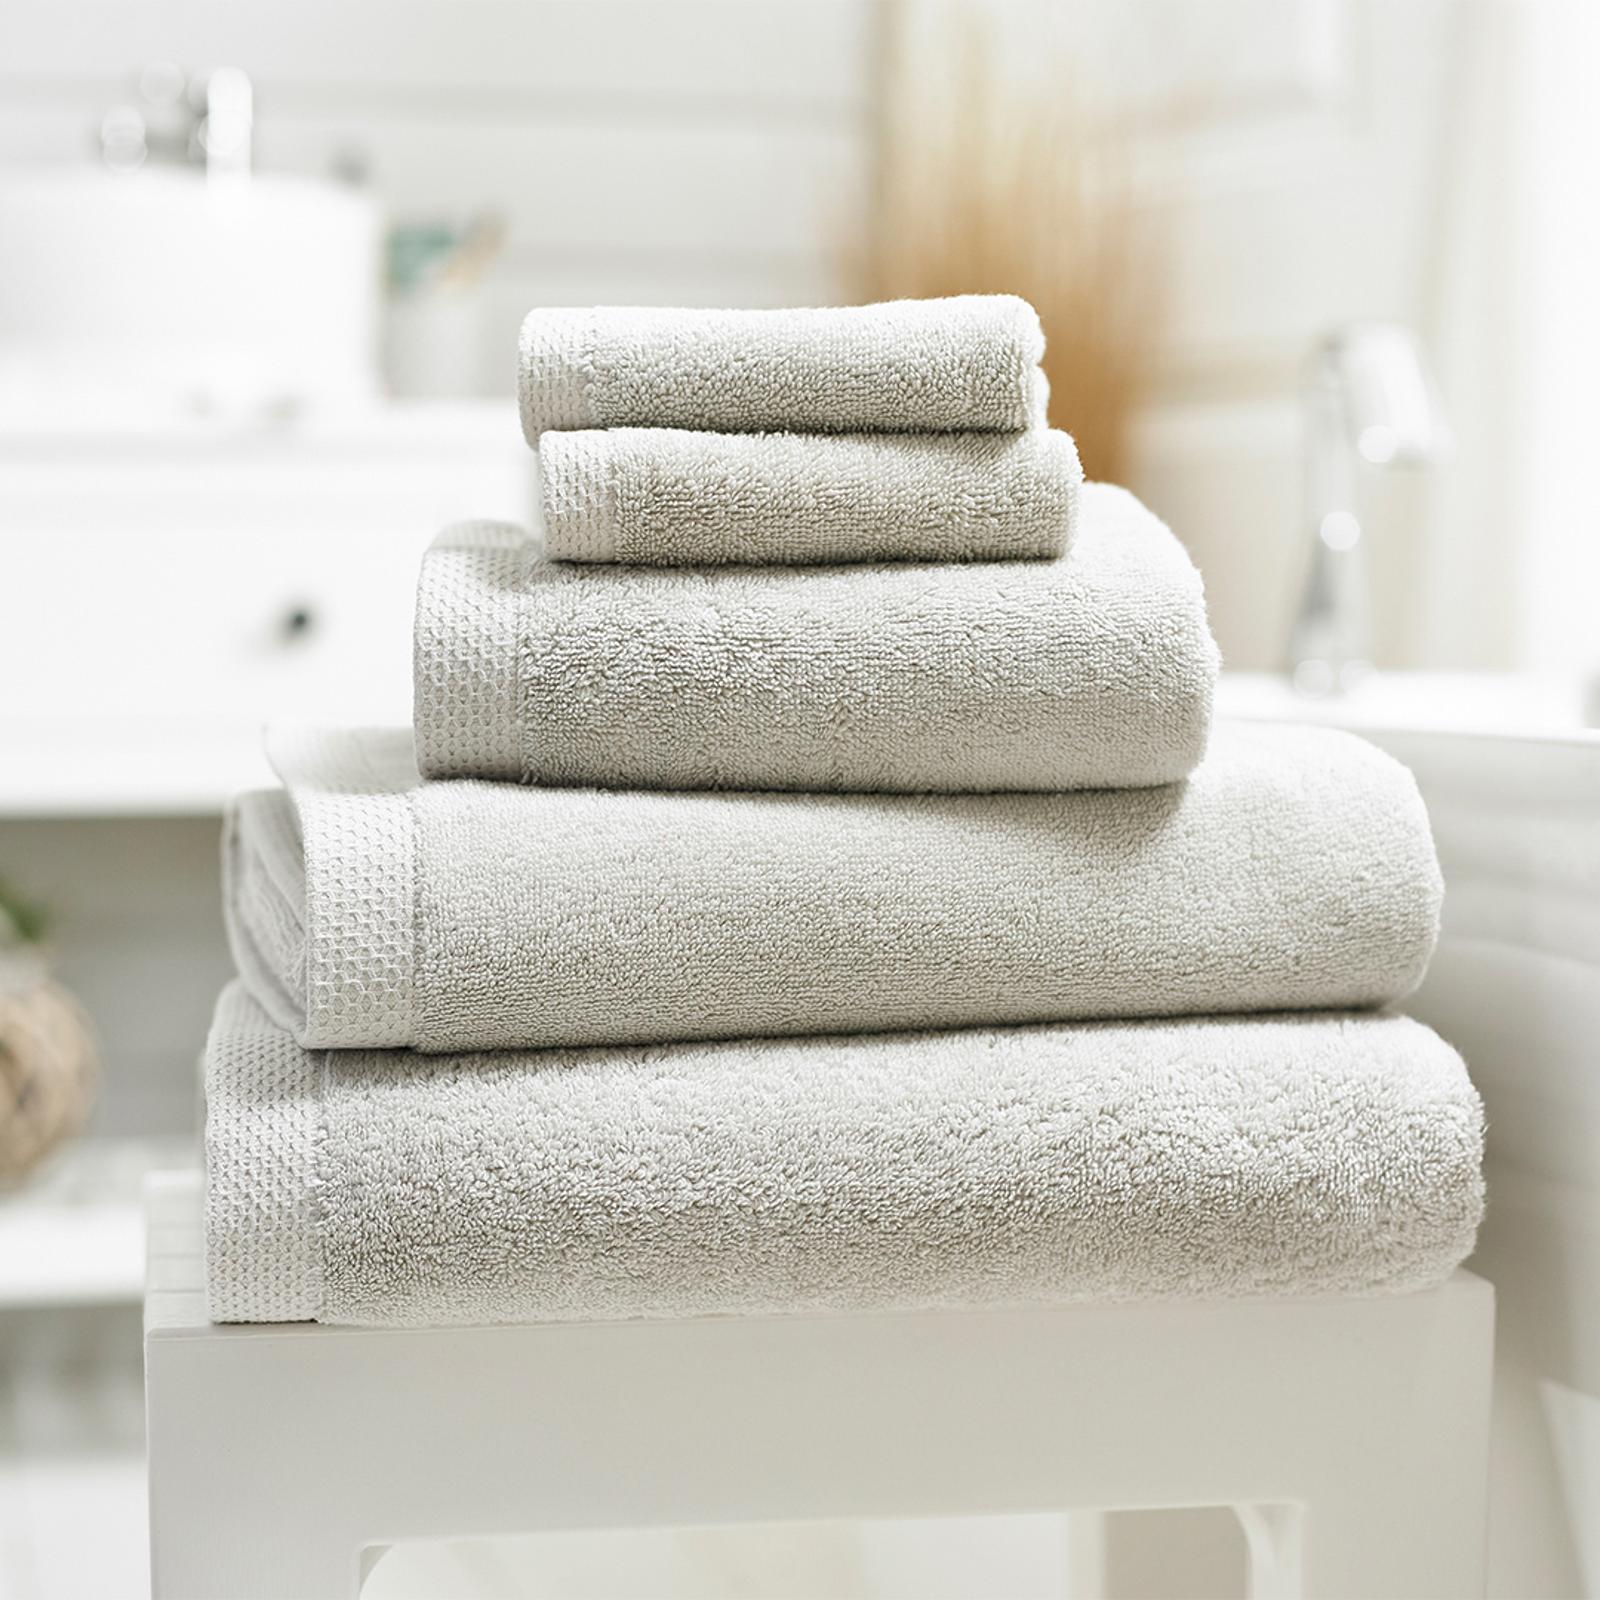 Pack of 8 Egyptian Spa 700GSM Towels Bundle, Putty - BrandAlley